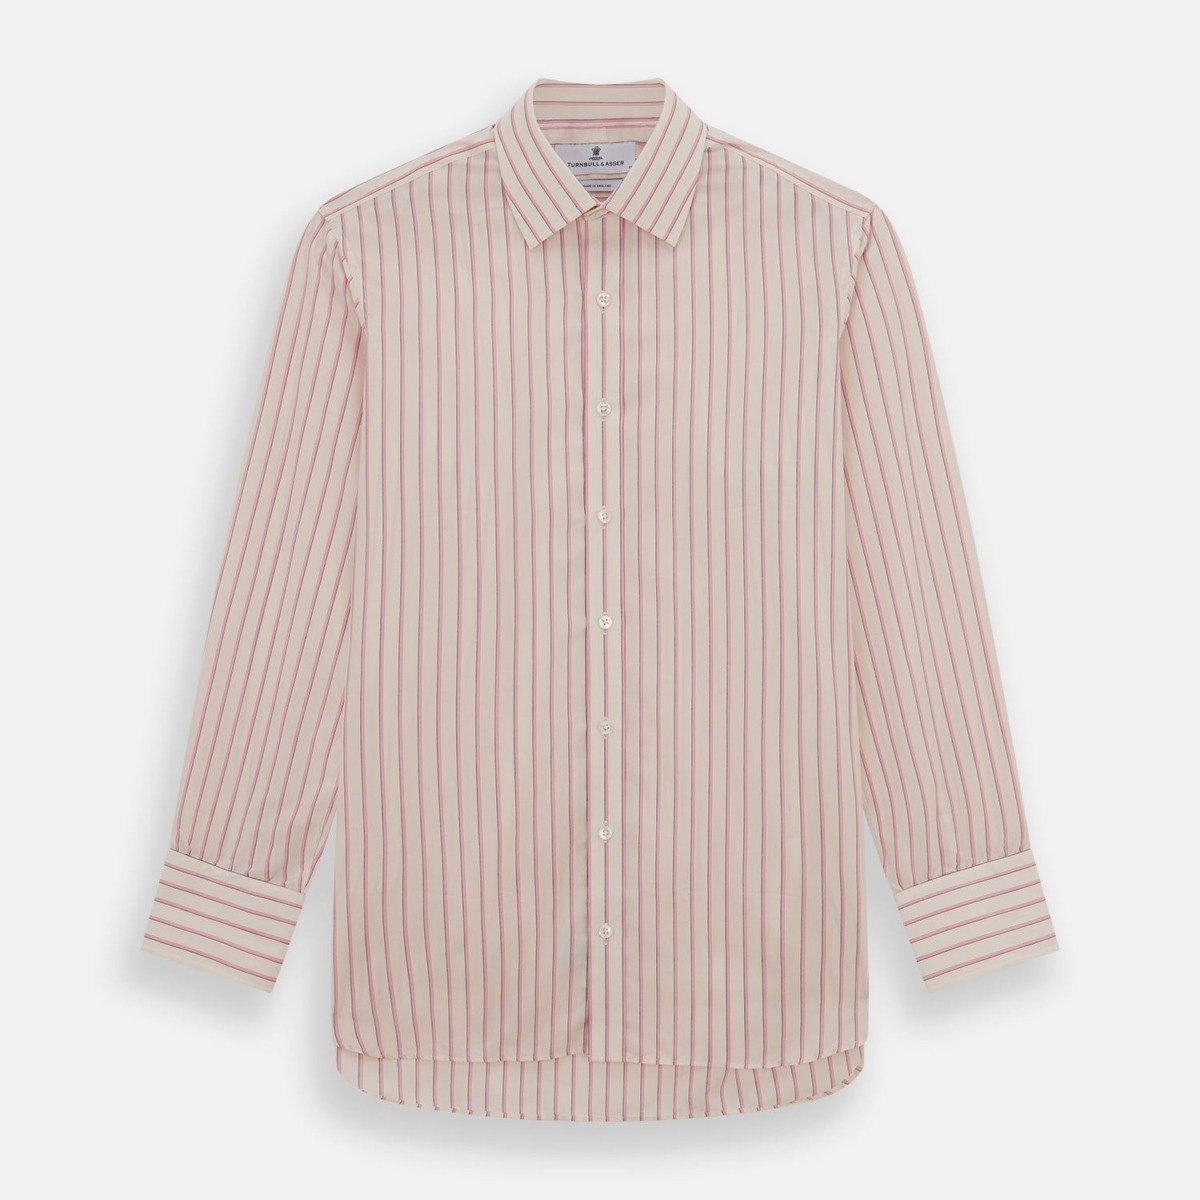 Turnbull & Asser Gents Shirt Pink by Turnbull And Asser GOOFASH